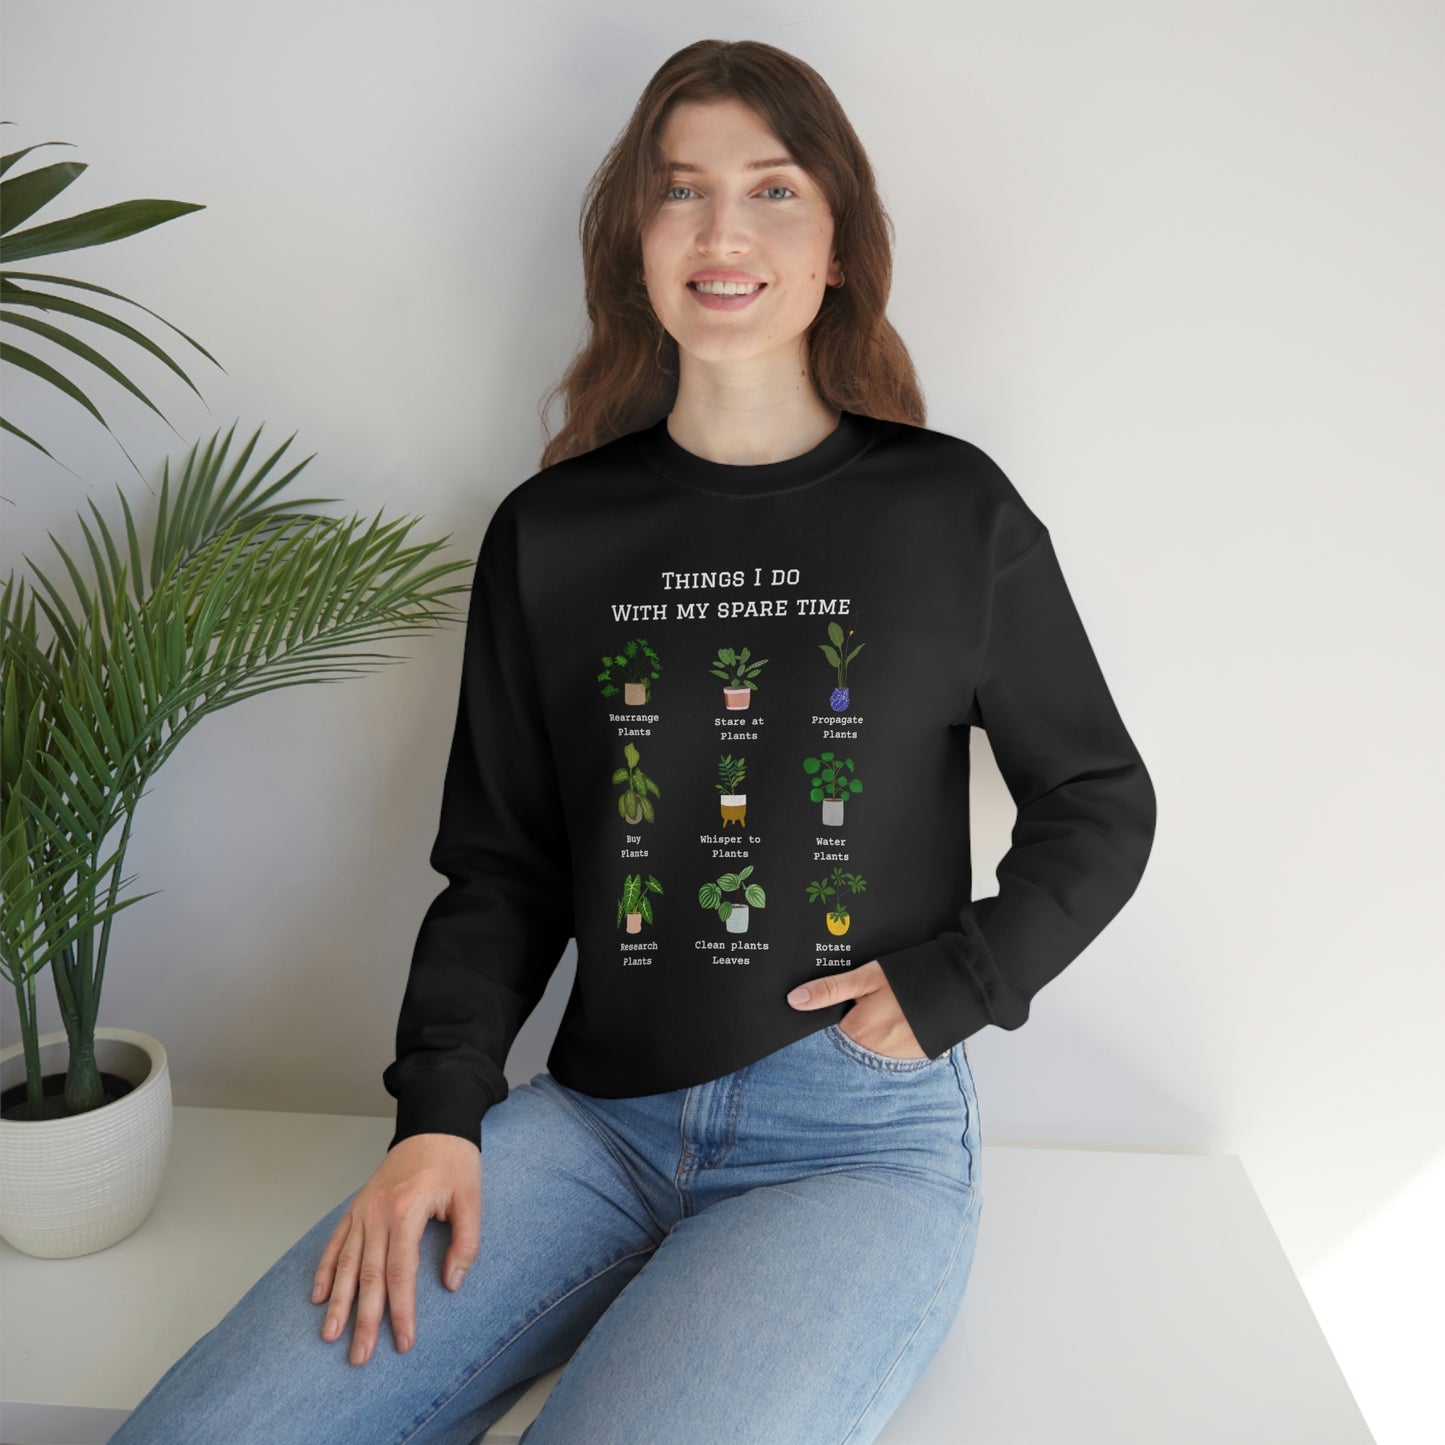 Things I do with my spare time swaetshirt. Funny plant swaetshirt. Plant sweater. Christmas gift for plant mama. Plant dad or plant lady.